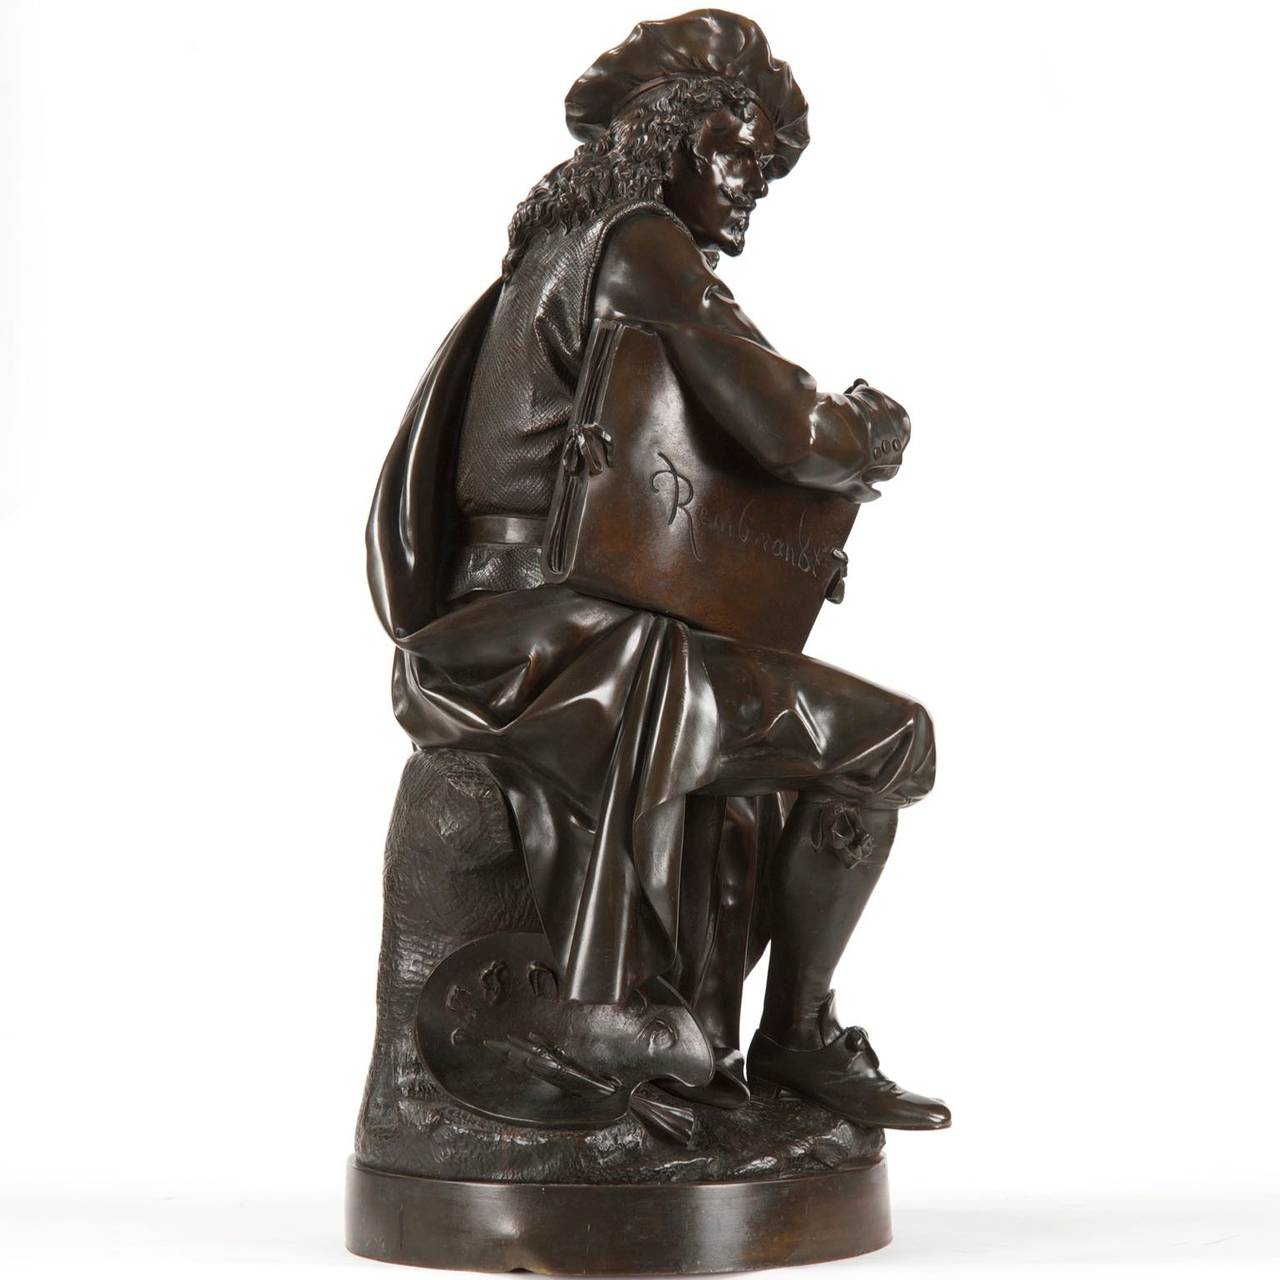 ALBERT CARRIER-BELLEUSE (FRENCH, 1824-1887) BRONZE SCULPTURE OF SEATED REMBRANDT
Signed 